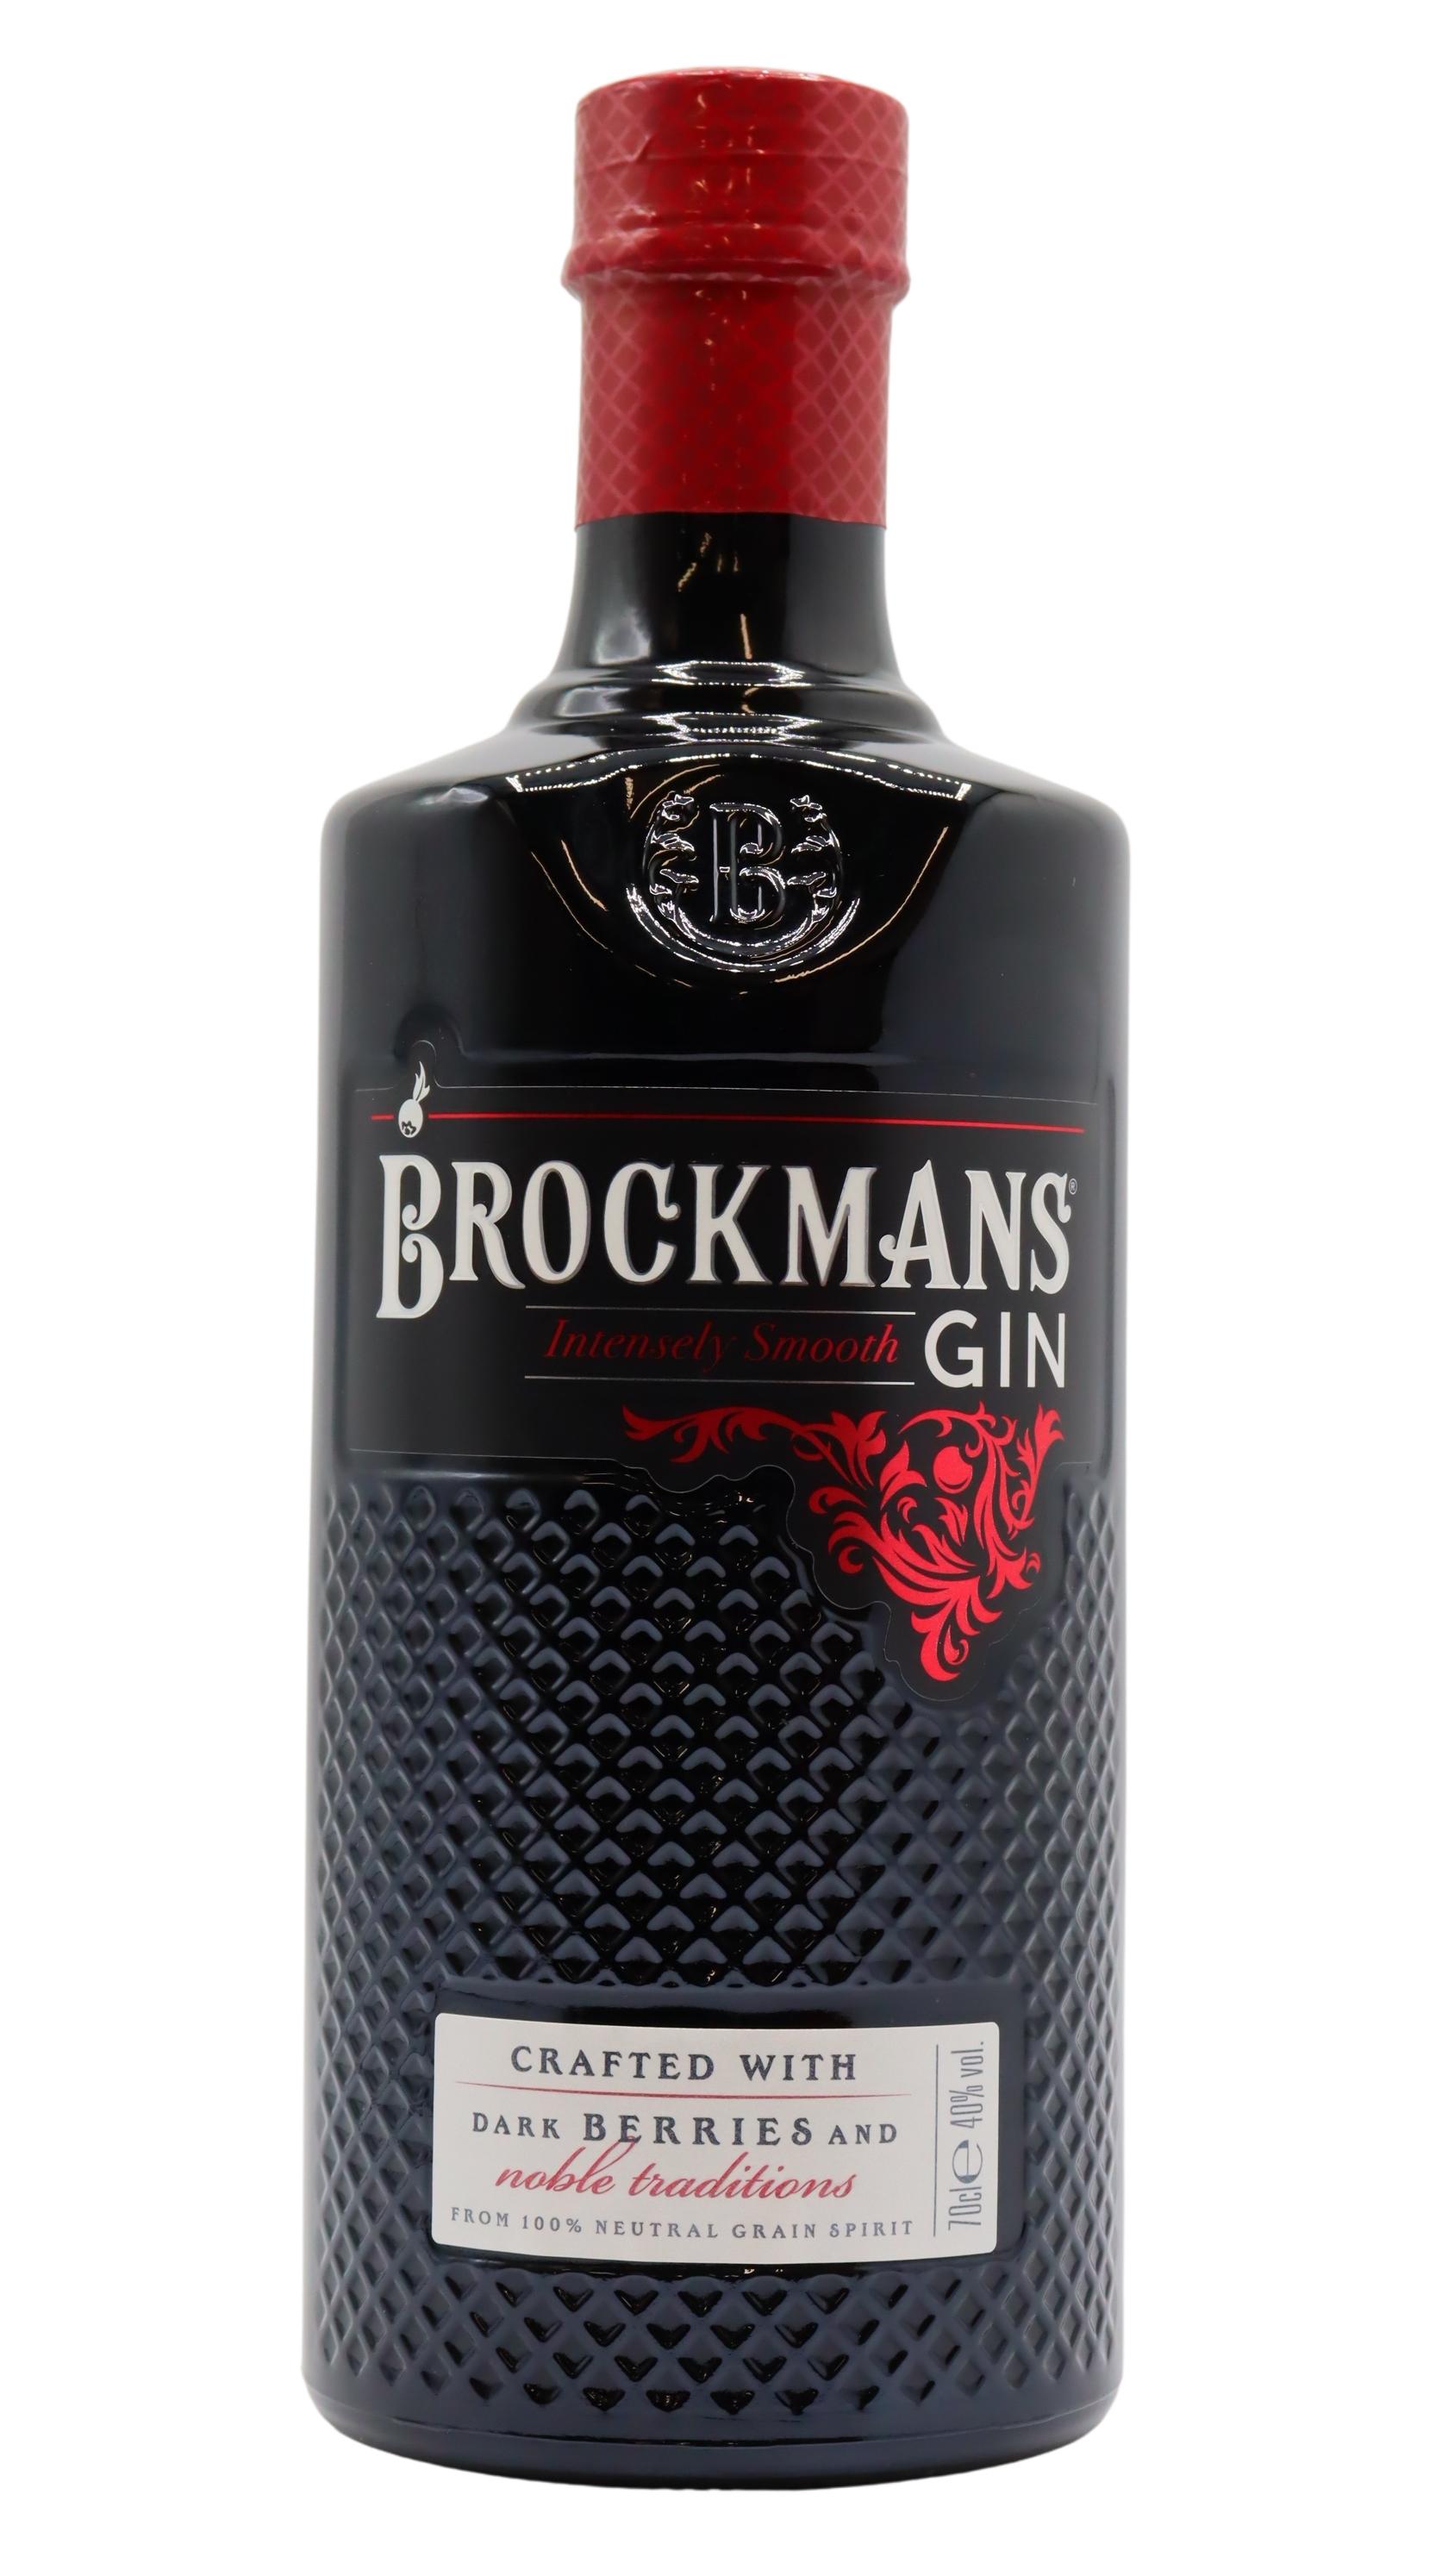 Brockmans - Intensely Smooth Gin | Whisky Liquor Store